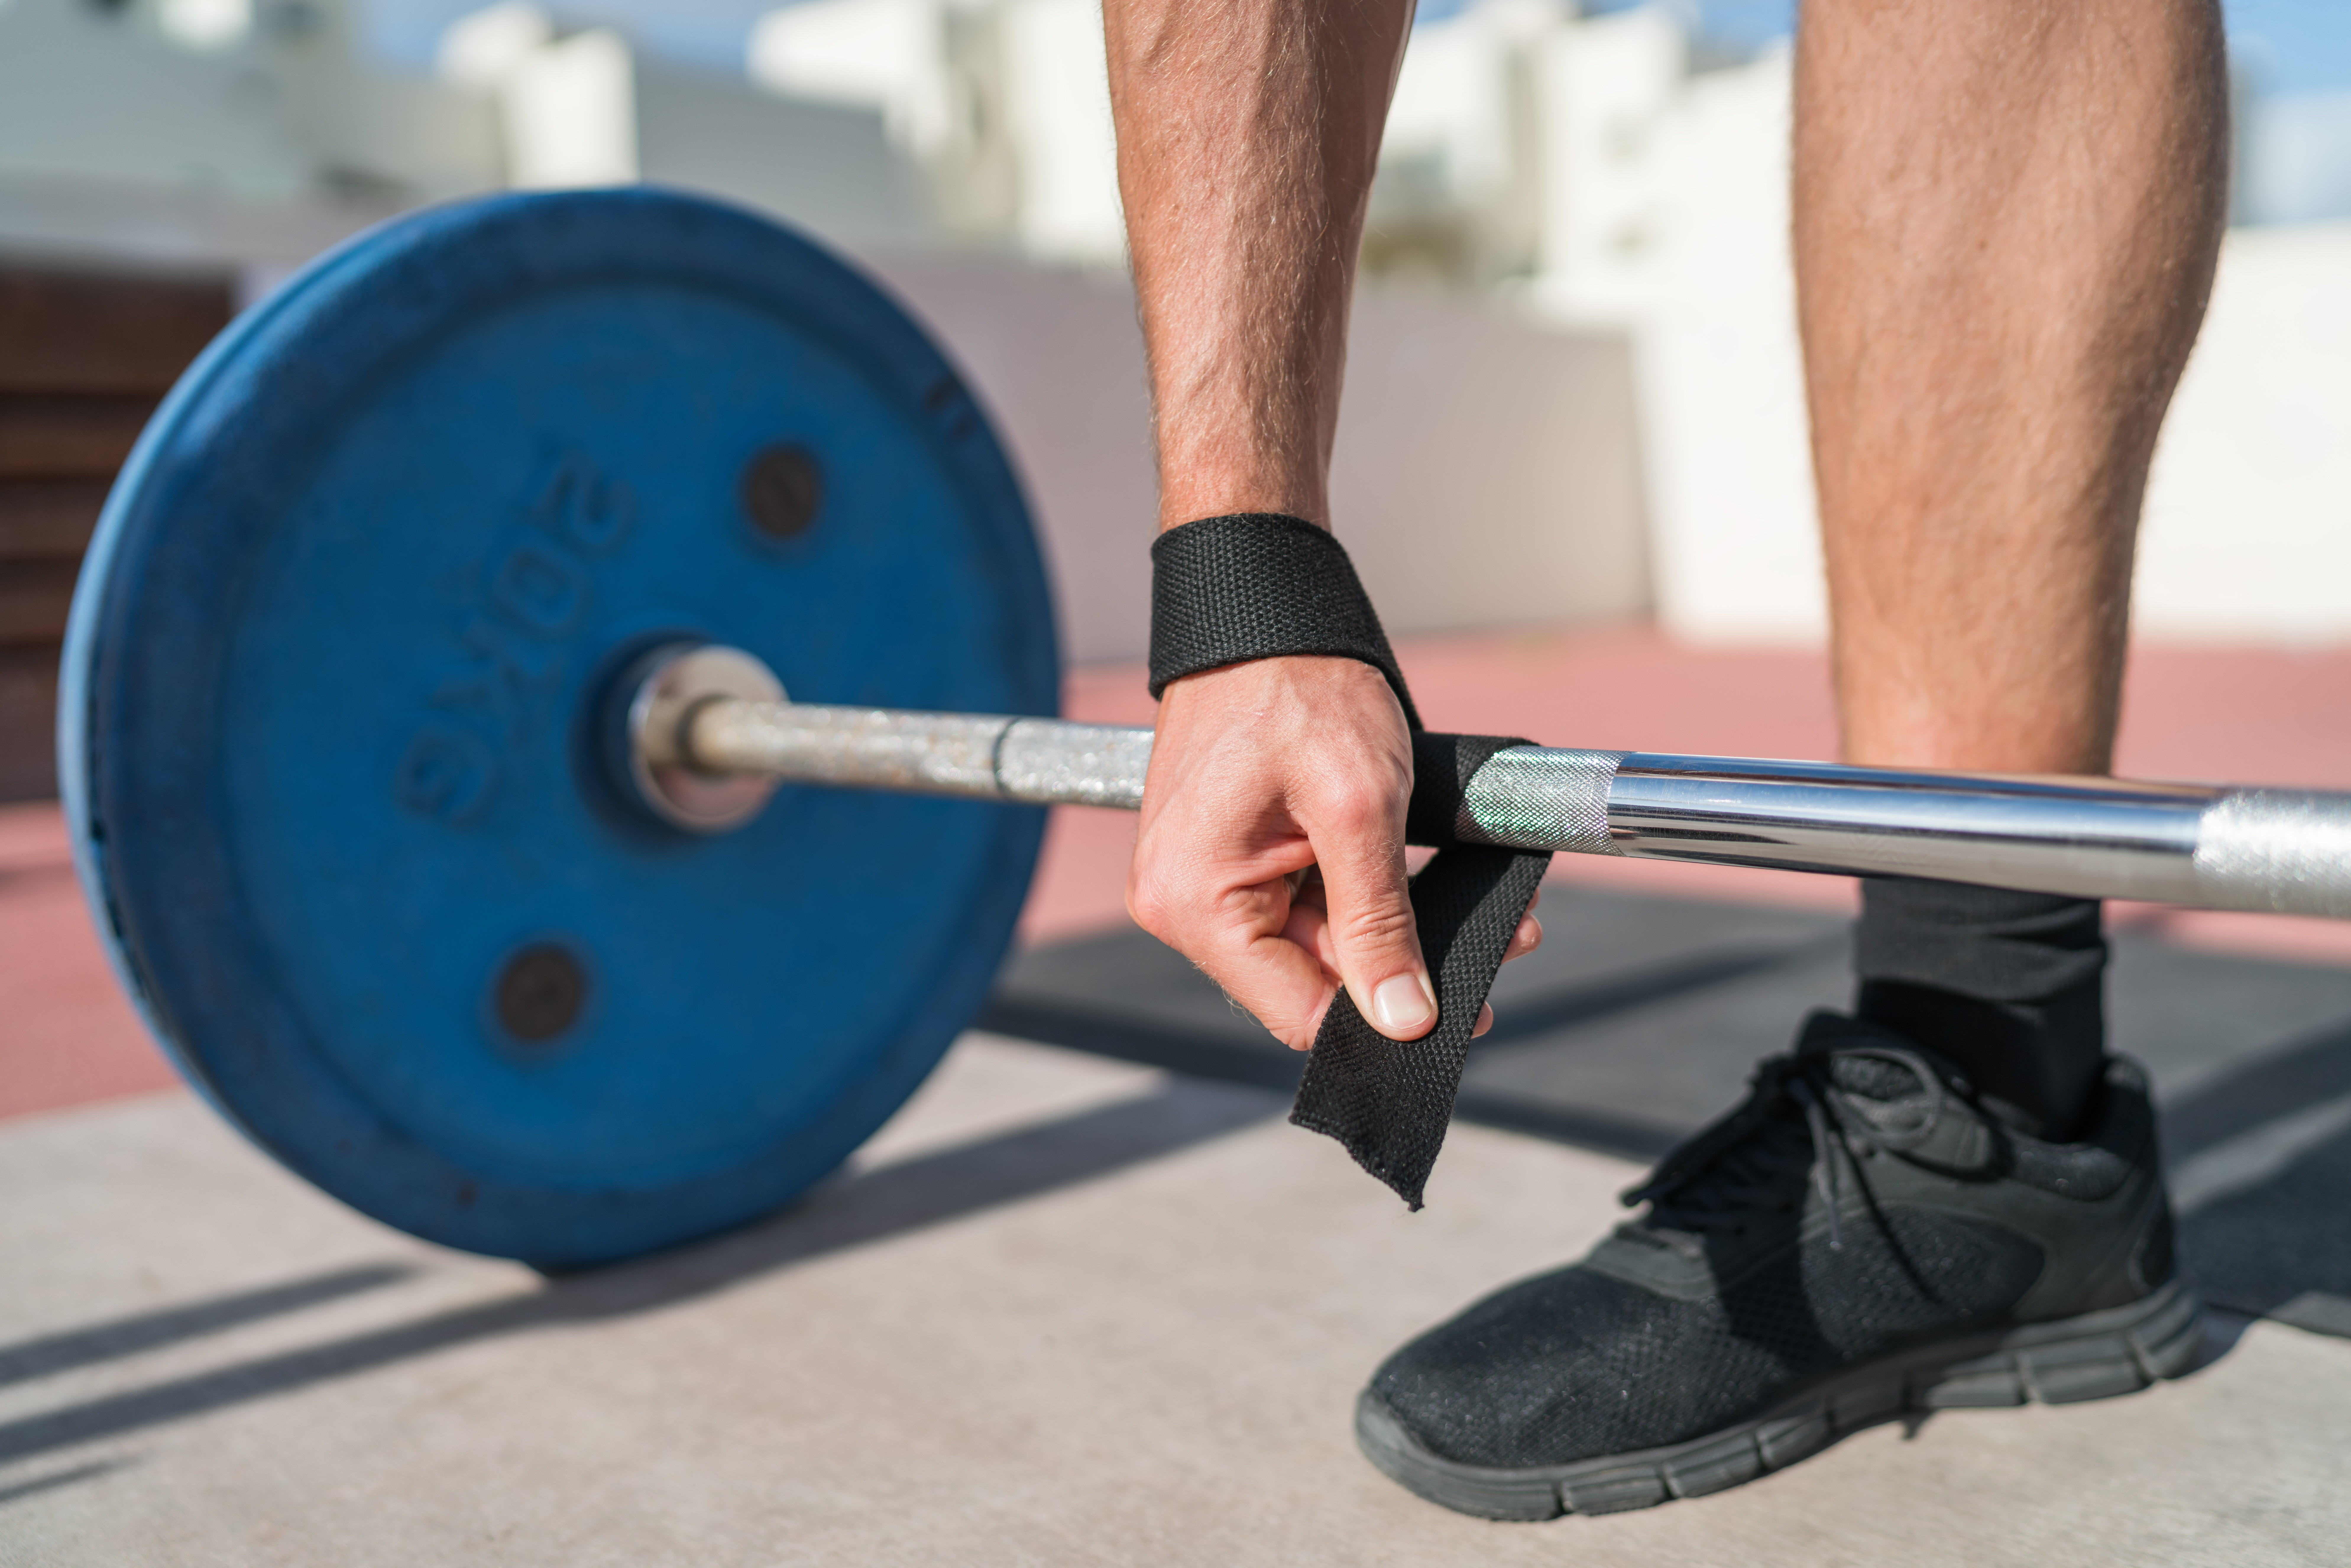 Deadlift Hook Grip: Why You Should Use It